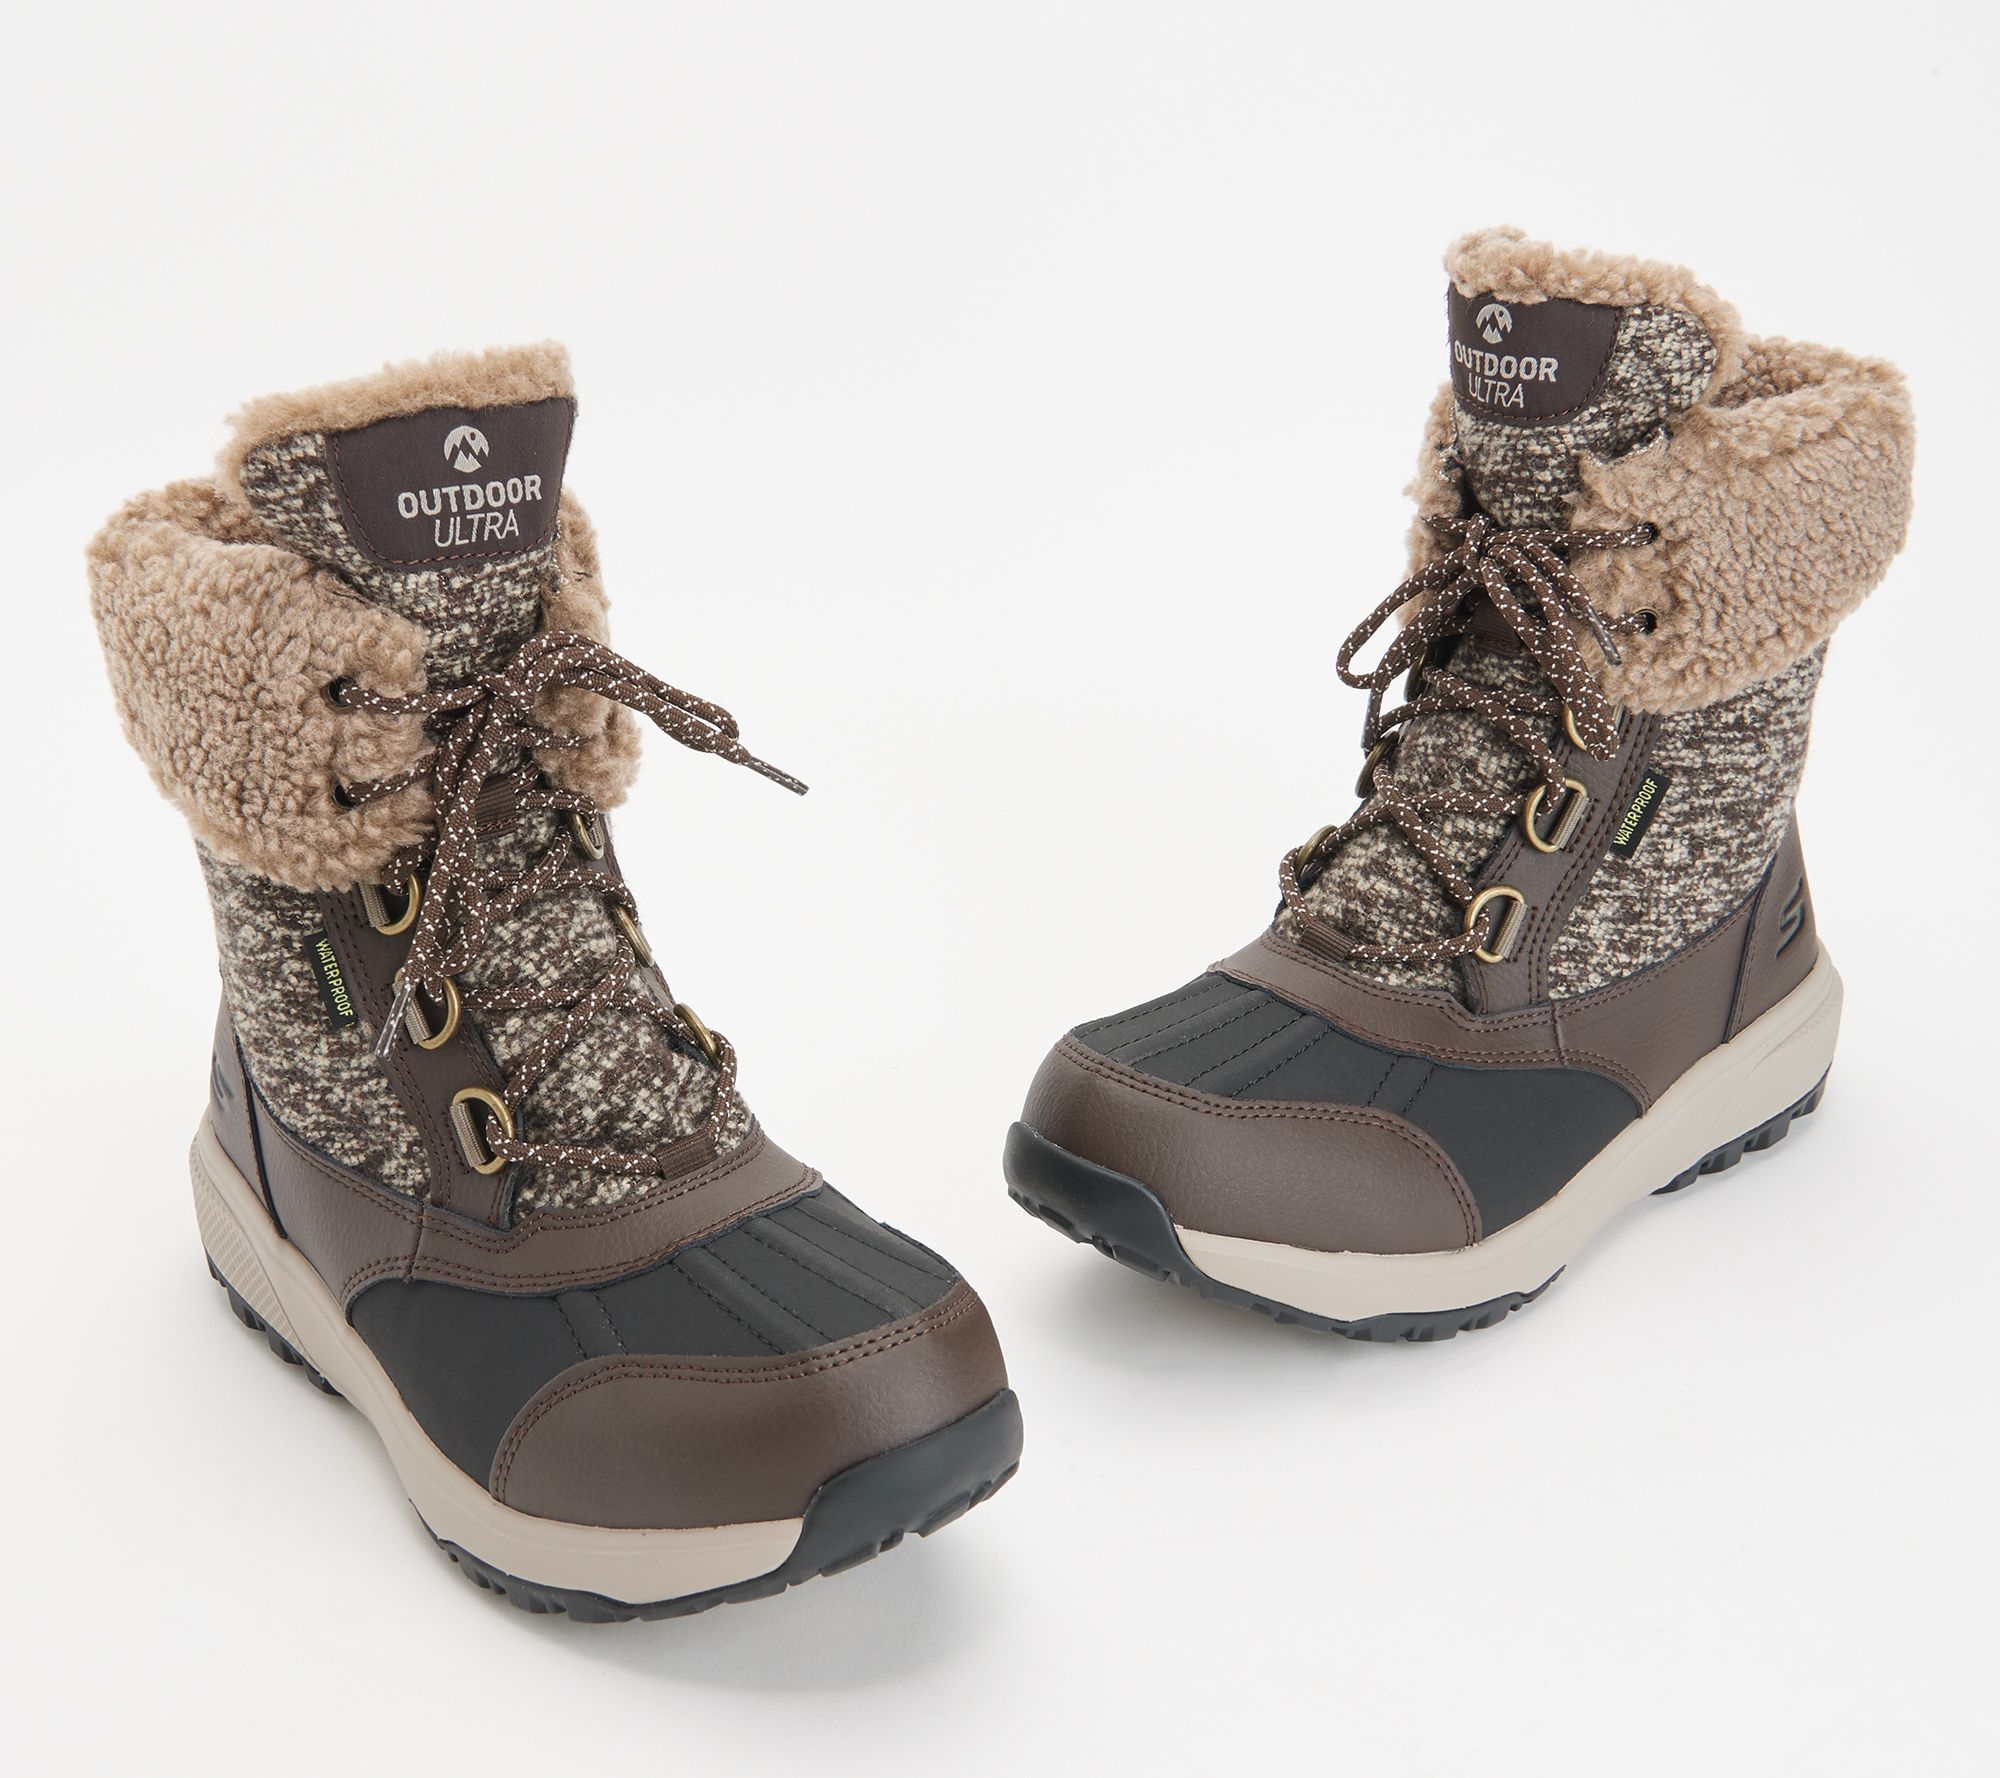 As Is" Skechers On-The Outdoors Boots -